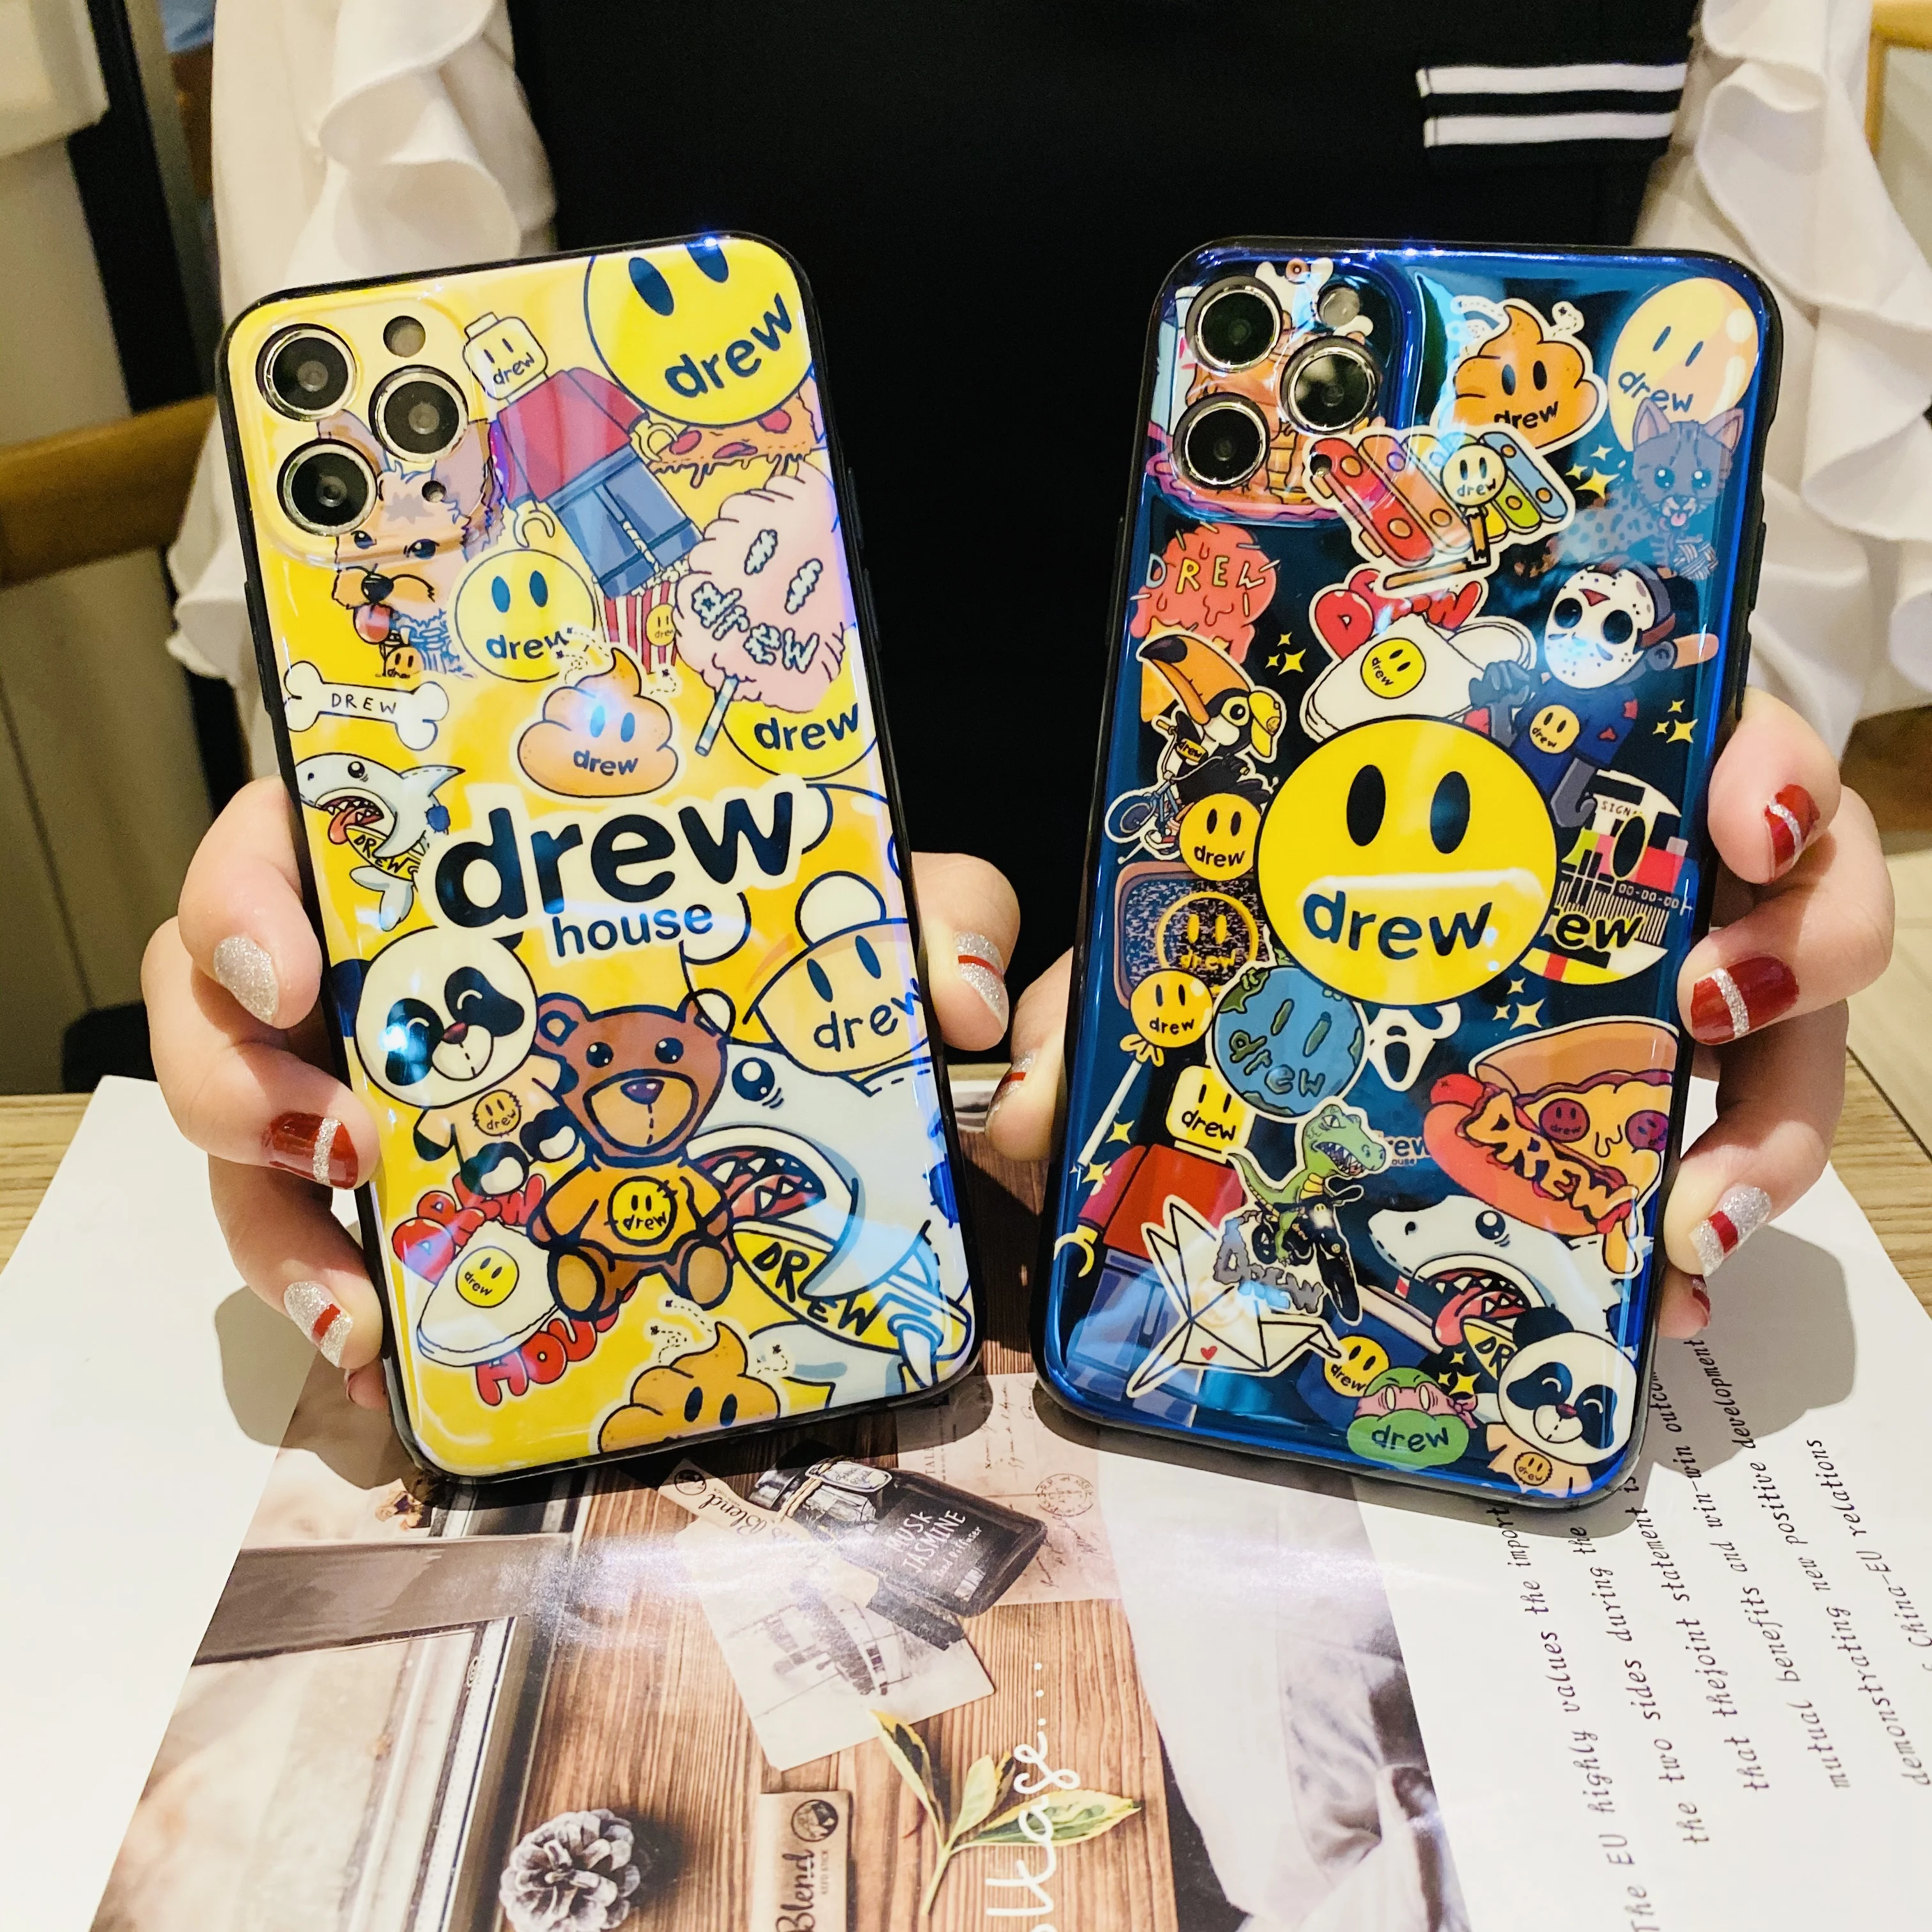 

Blue Ray Cartoon Smile Face Phone Cover For Redmi 9T 9A 9C 9Prime 8A 7A 6A 6 Pro 5A K20 K30 K40 Pro Plus Silicone Soft TPU Case